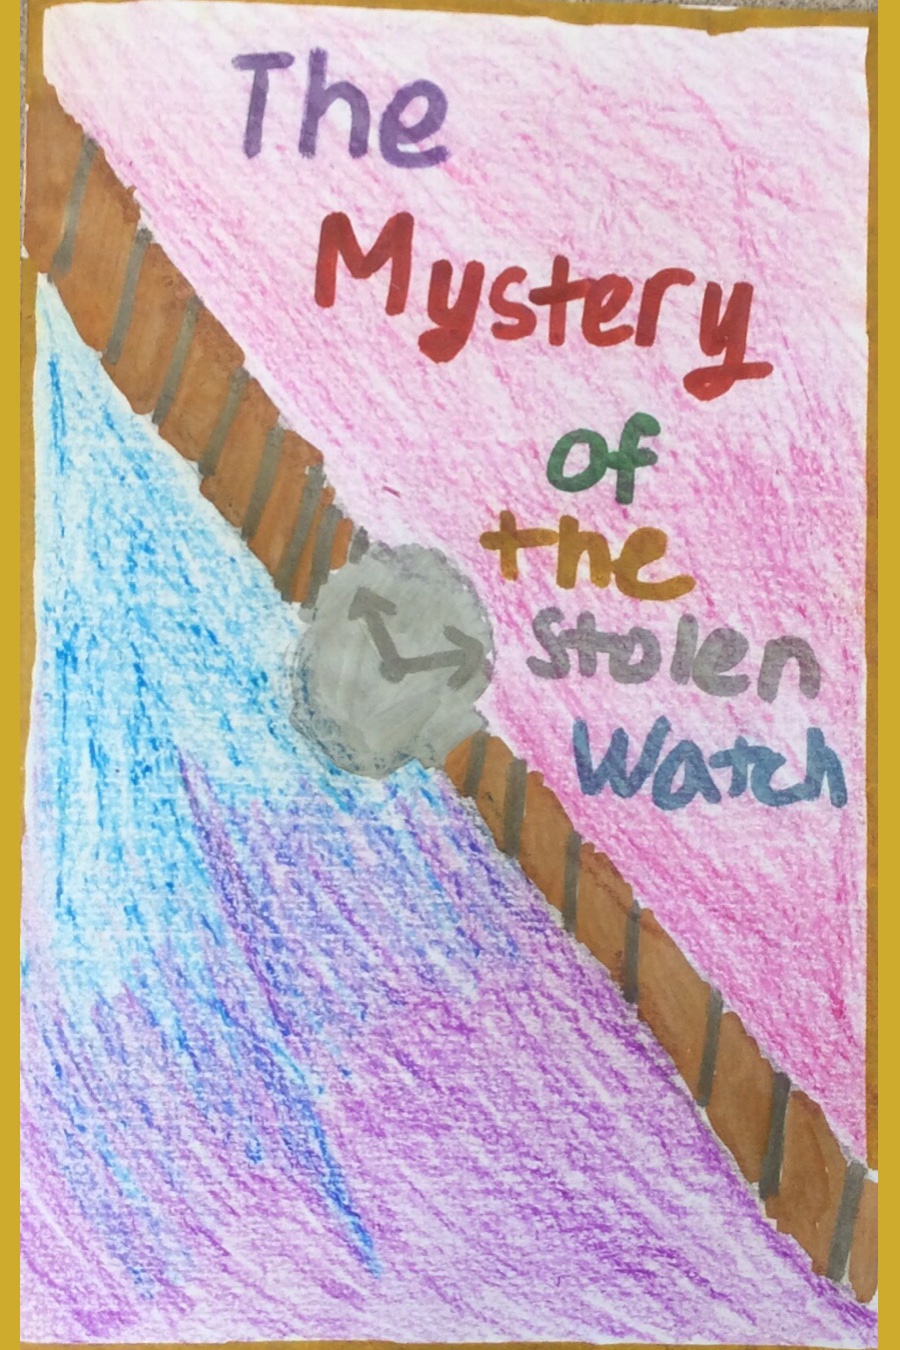 The Mystery of the Stolen Watch by Allison Ally L